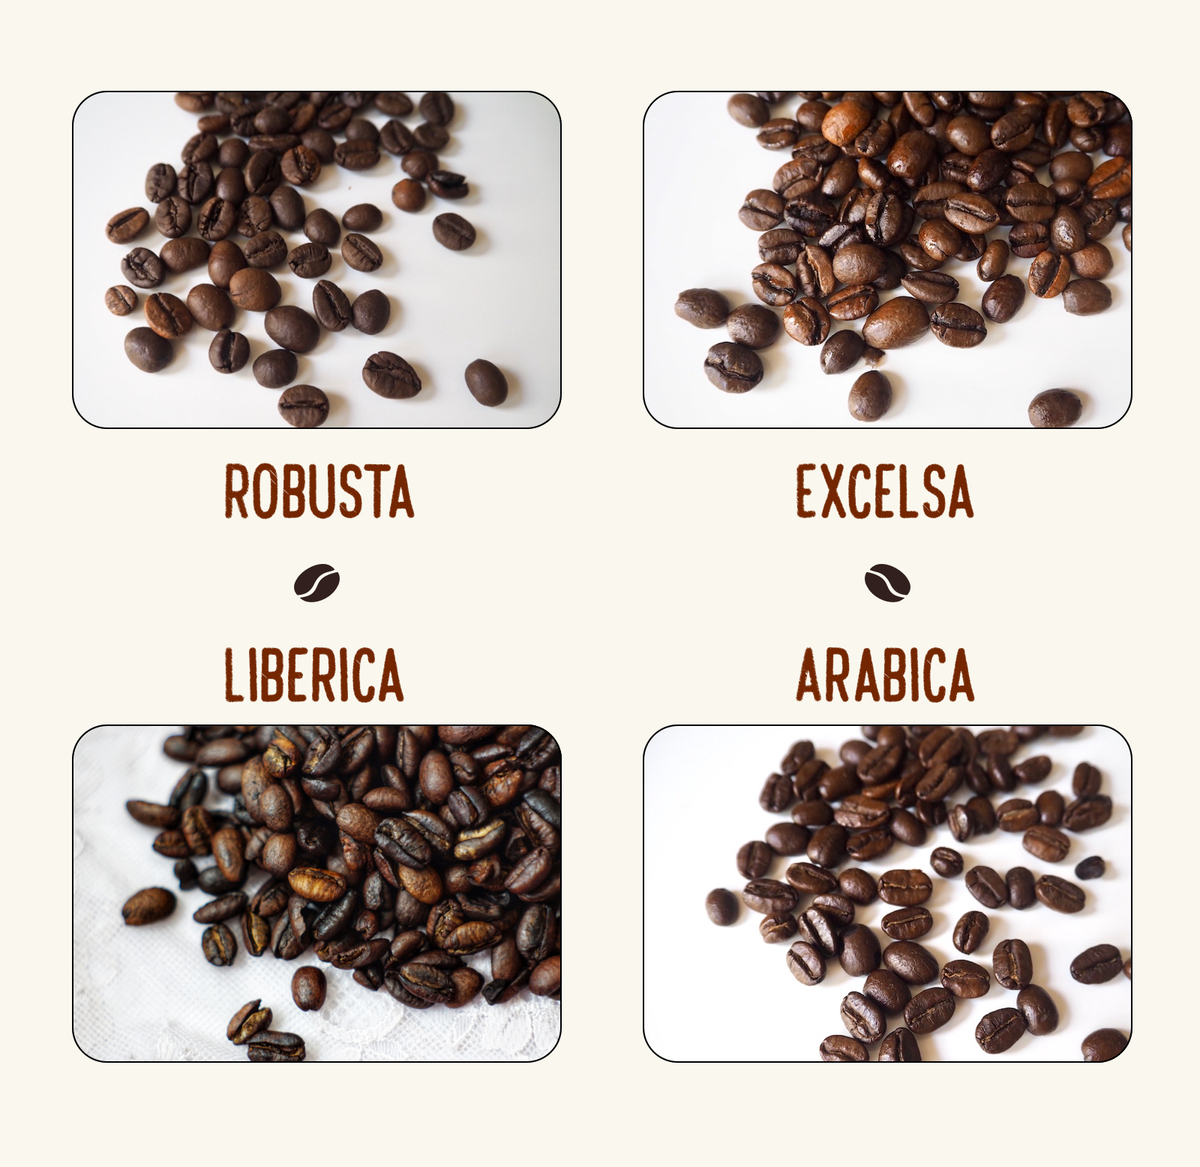 What Are The Main Types Of Coffee Beans And Whats The Difference Between Them?